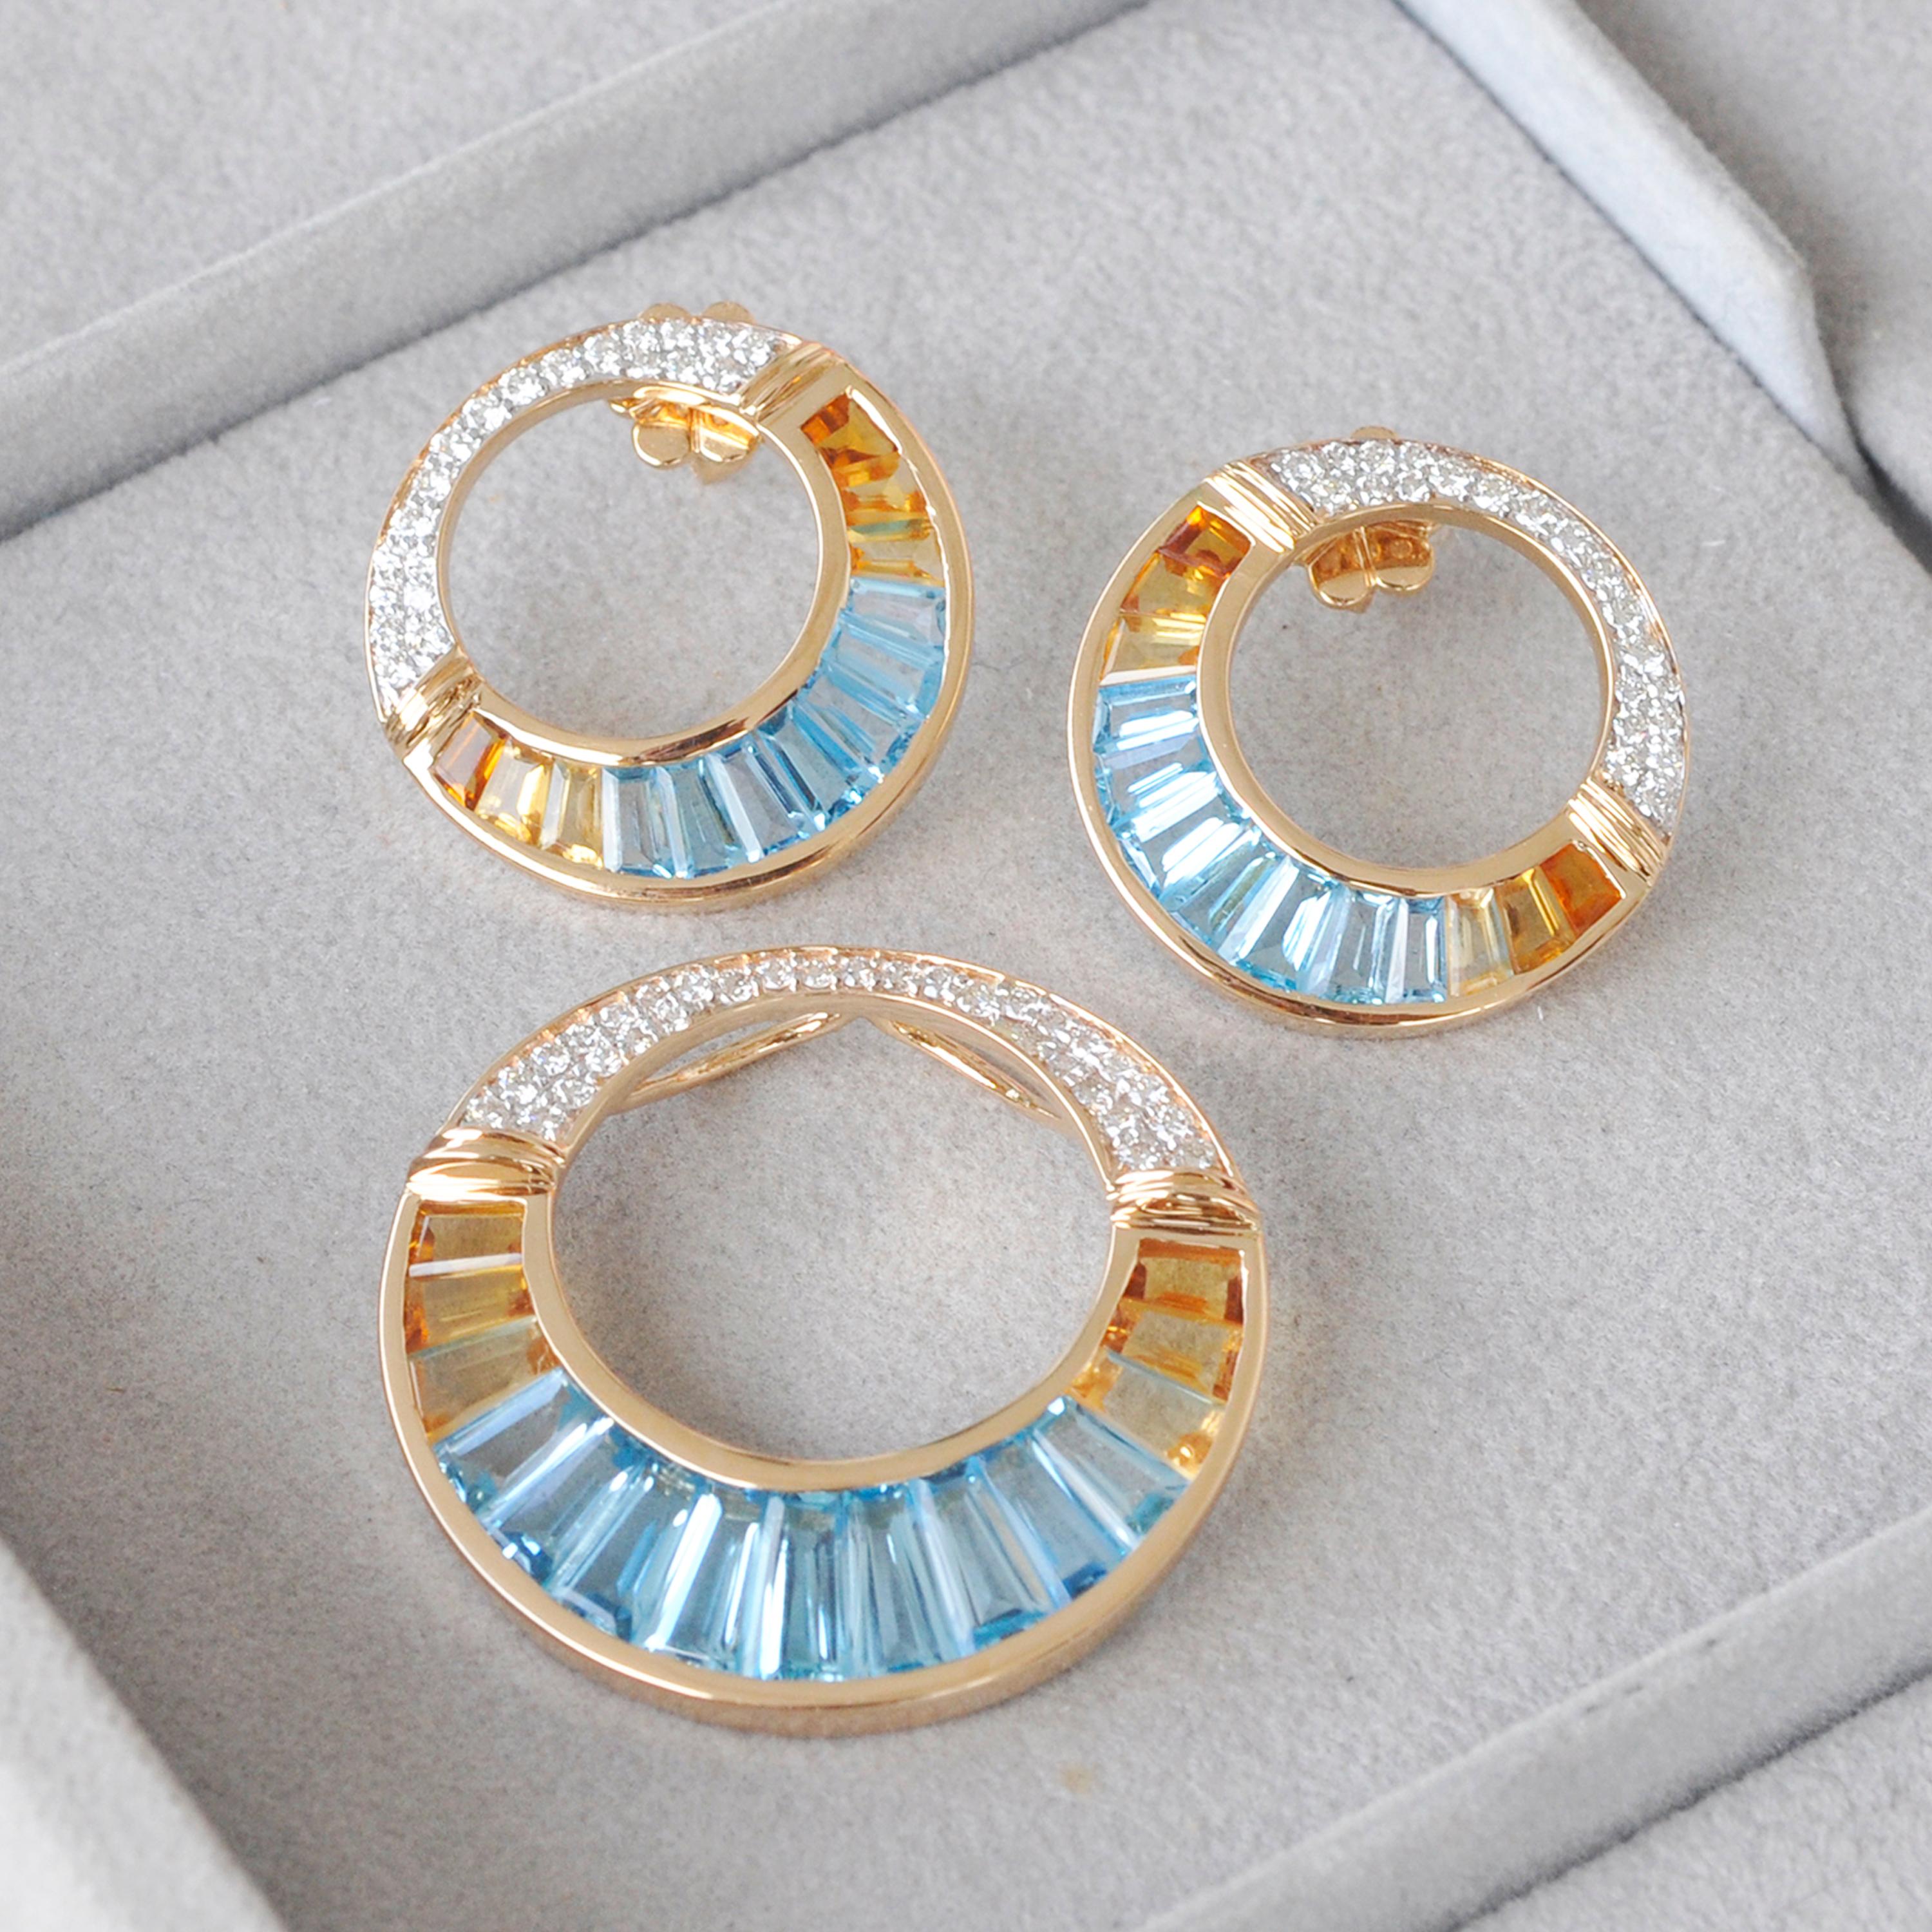 18 karat yellow gold swiss blue topaz citrine baguette diamond pendant brooch earrings set

This set of 18 karat yellow gold blue topaz citrine baguette and diamond circular pendant / brooch and earrings is inspired by the jewels worn by Cleopatra